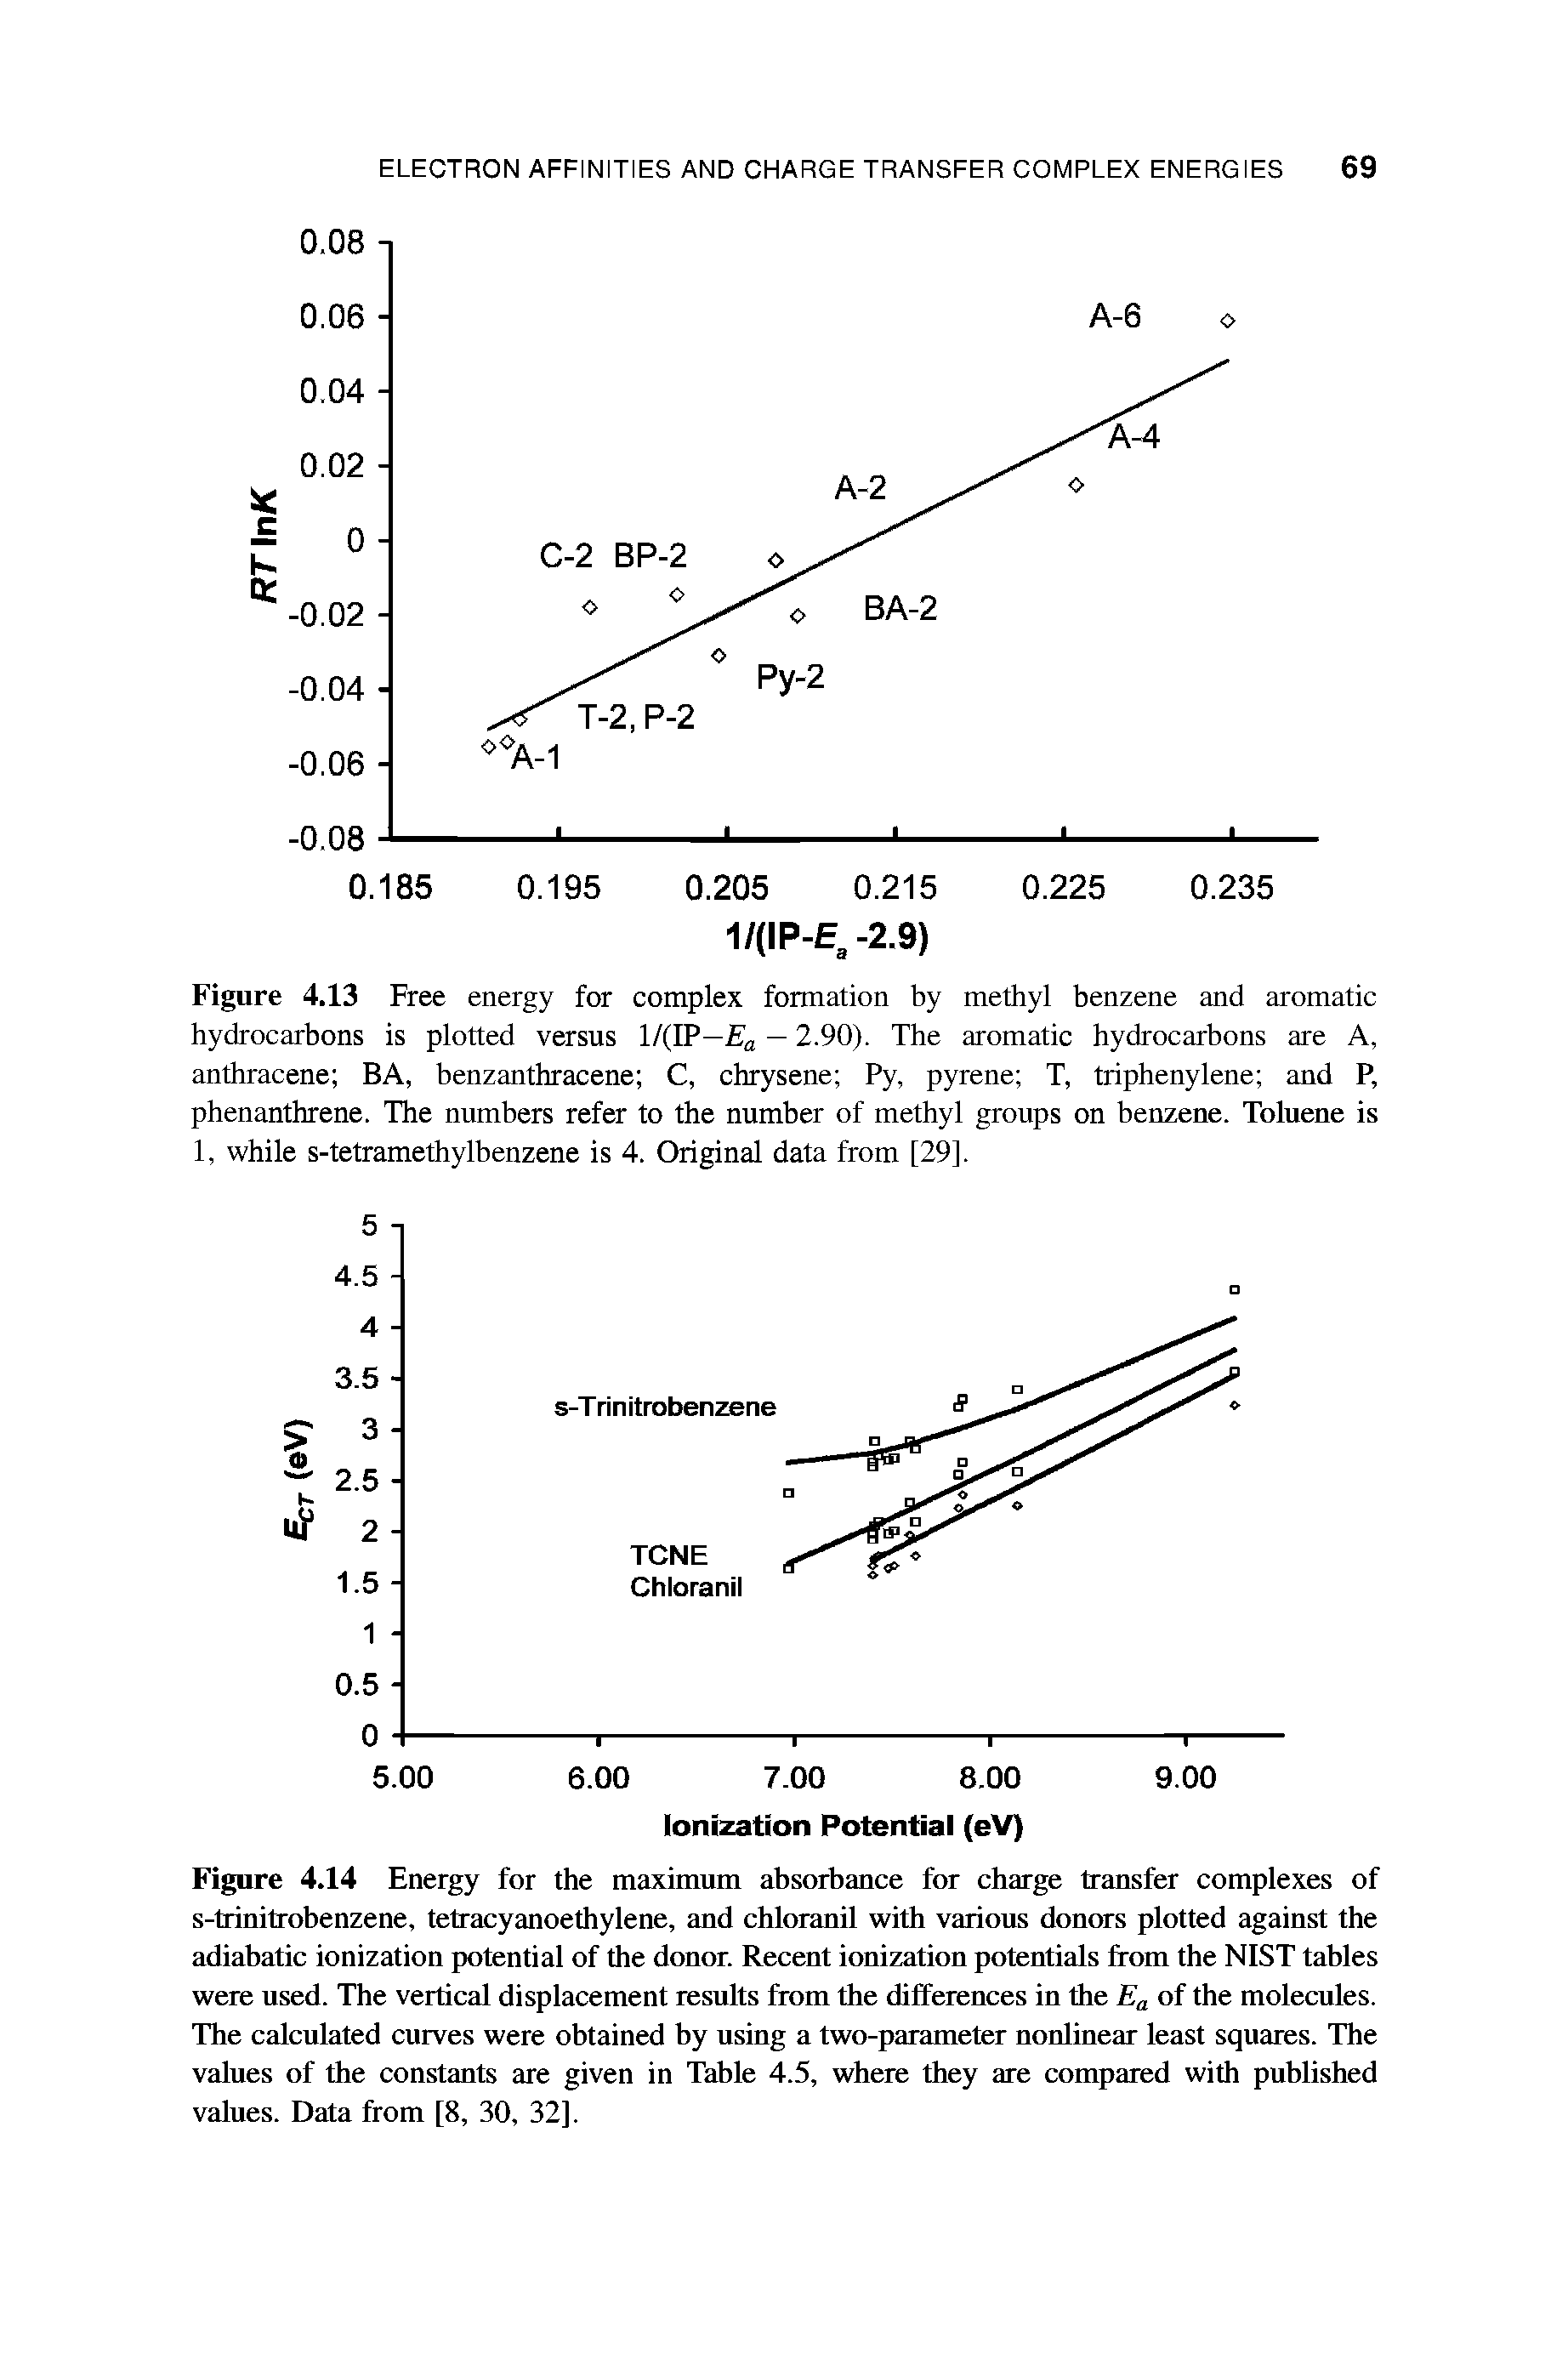 Figure 4.14 Energy for the maximum absorbance for charge transfer complexes of s-trinitrobenzene, tetracyanoethylene, and chloranil with various donors plotted against the adiabatic ionization potential of the donor. Recent ionization potentials from the NIST tables were used. The vertical displacement results from the differences in the Ea of the molecules. The calculated curves were obtained by using a two-parameter nonlinear least squares. The values of the constants are given in Table 4.5, where they are compared with published values. Data from [8, 30, 32].